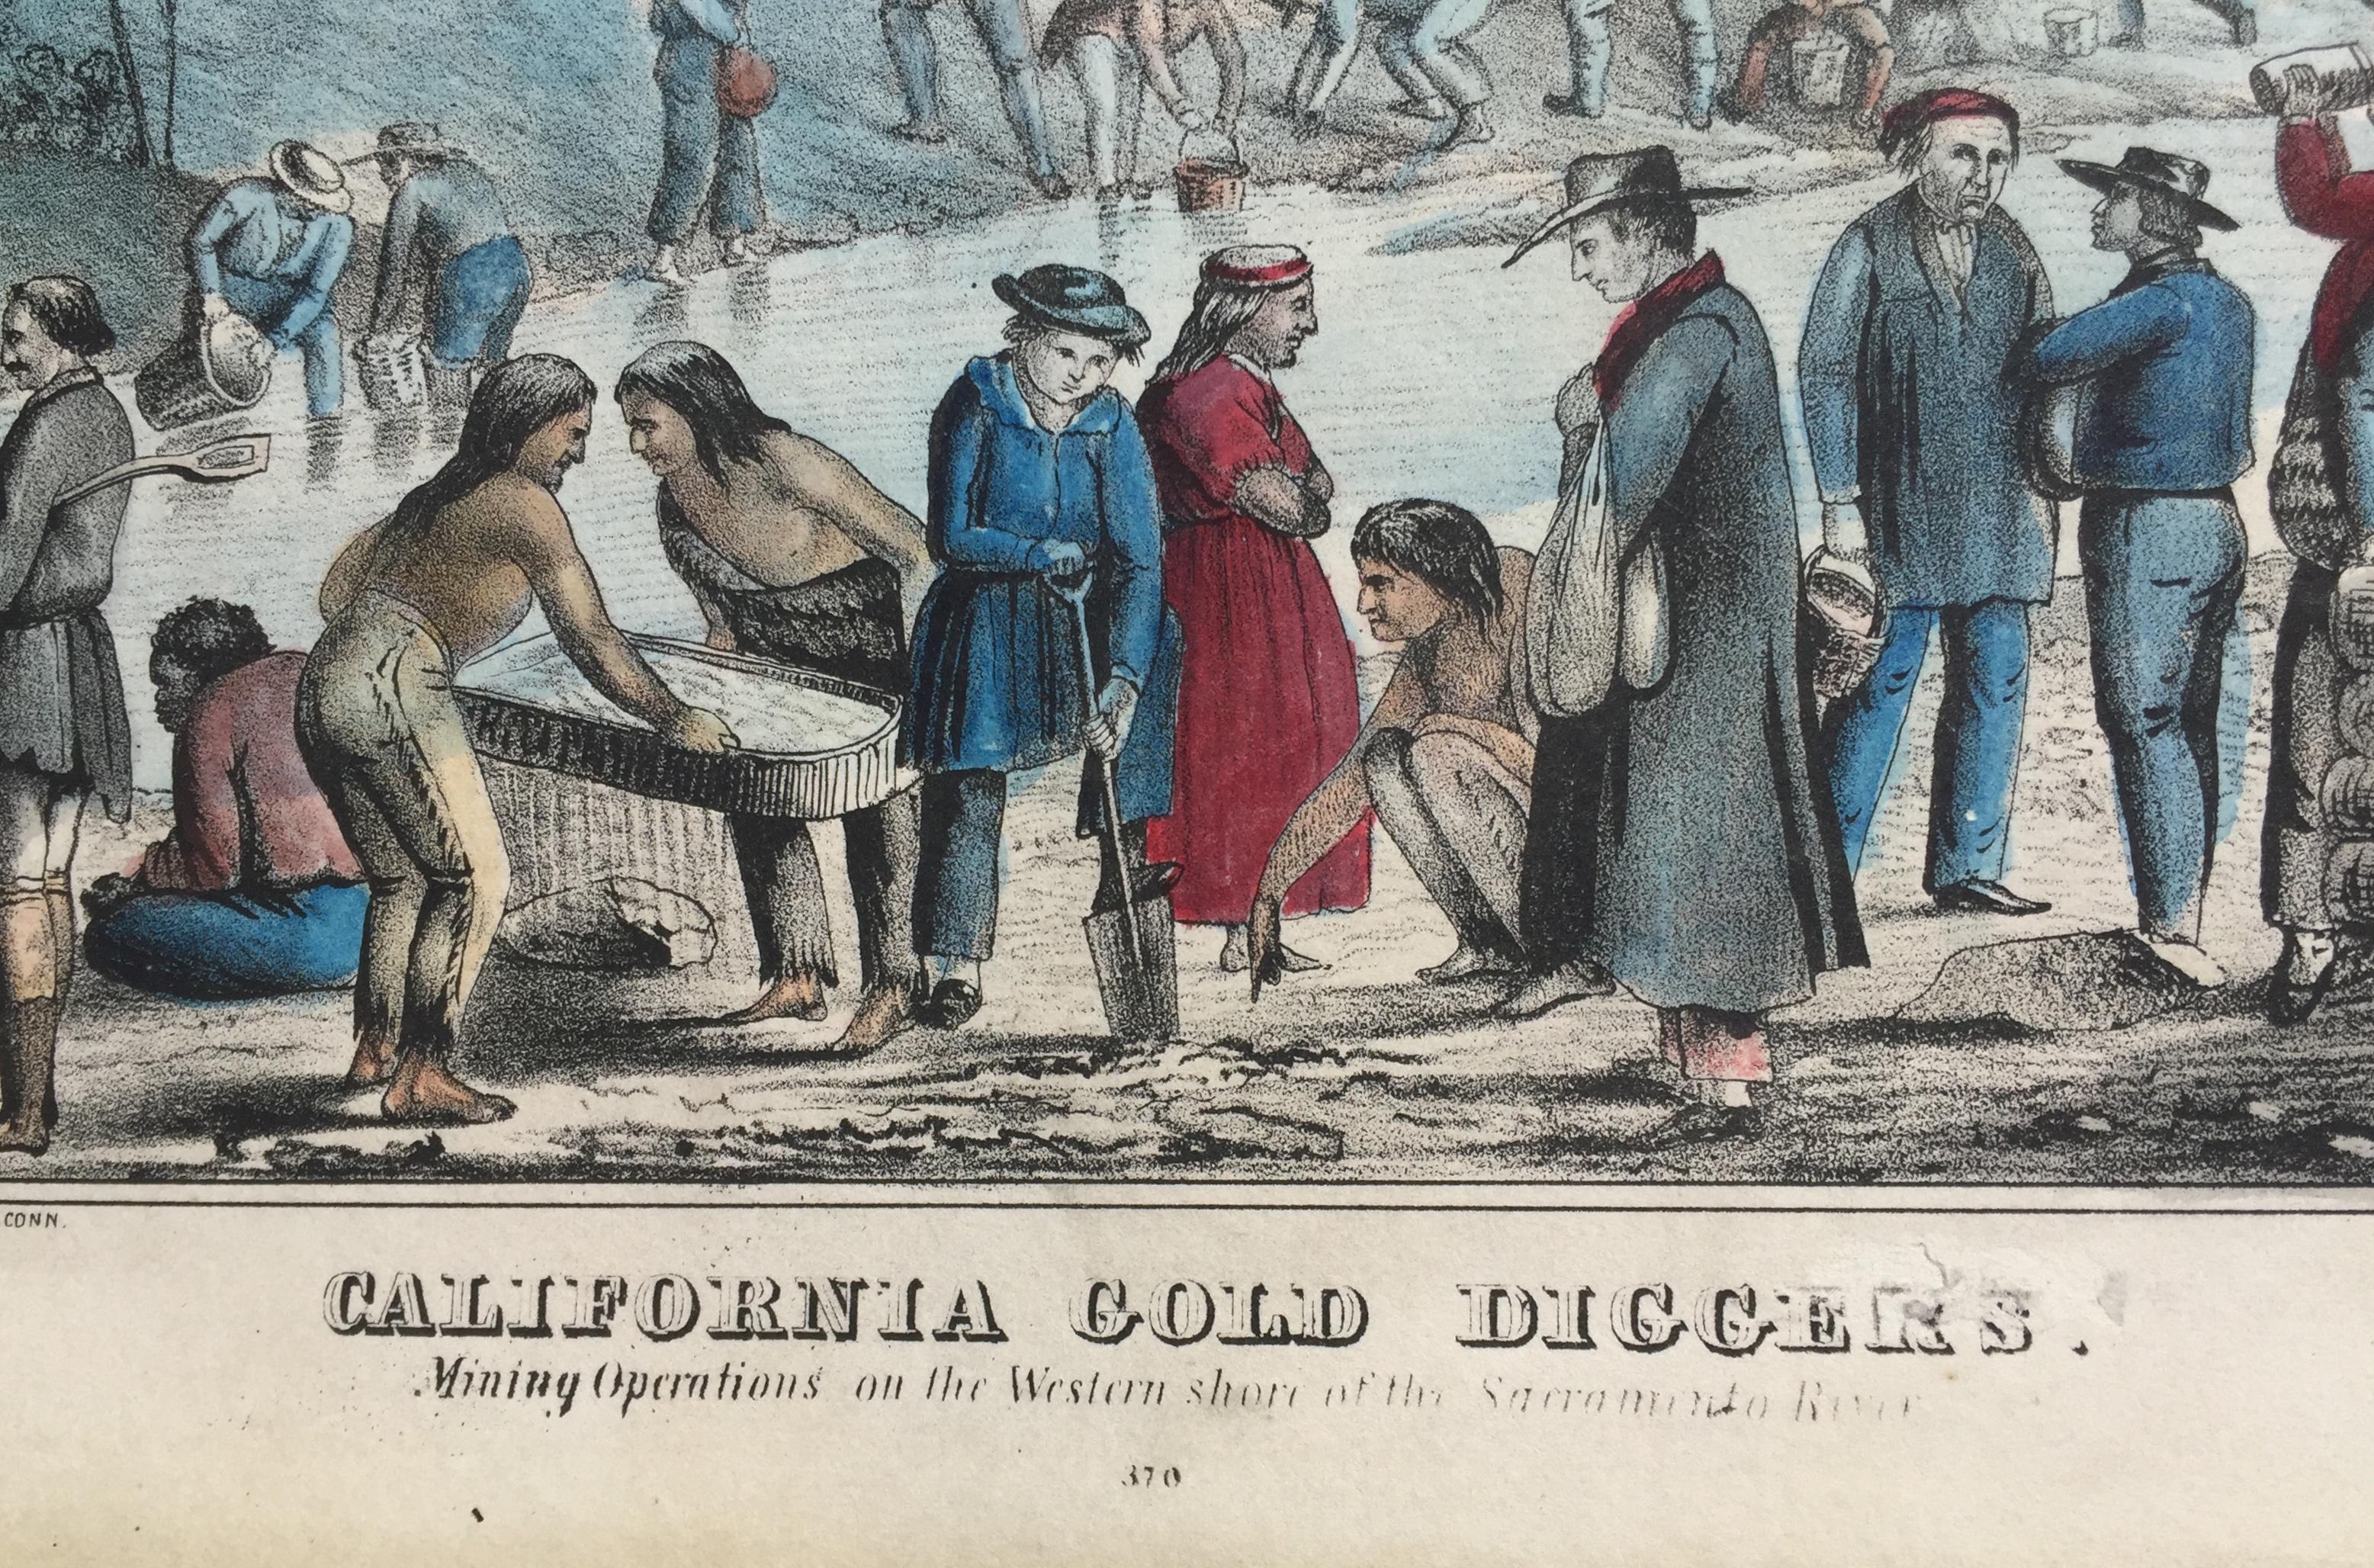 CALIFORNIA GOLD RUSH - c. 1849 - Early

CALIFORNIA GOLD DIGGERS - Mining Operations on the Western Shore of the Sacramento River, 1849 (Finley 111) Lithograph published by Kellogg & Comstock, New York & Hartford Conn. Ensign & Thayer, Buffalo.